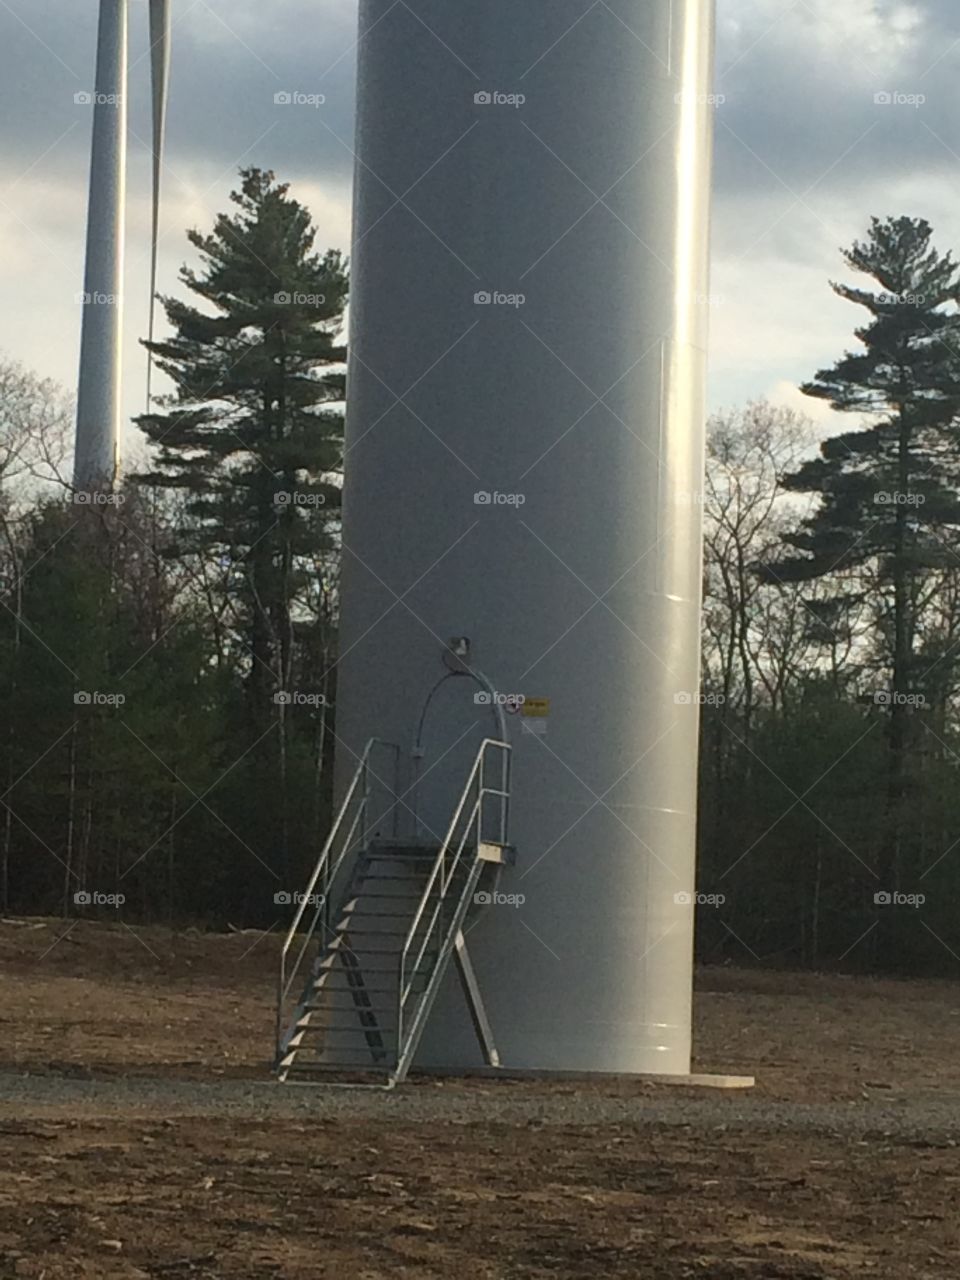 I was in a serious motor vehicle accident back in Sept '16'. Other health issues have kept me from a full recovery after a Spinal Fusion of 5 sections of my spine that is now home to 2 metal rods and 10 screws. I wanted to see these huge turbines up close and personal. Greene RI is home to at least 8 in about 25 mile radius. They were enormous and the sounds that come off of them it's just breathtaking. It was a treacherous walk even with my cane it was a dirt road which of course made it harder but I did it. Yay me👏🏻🙌